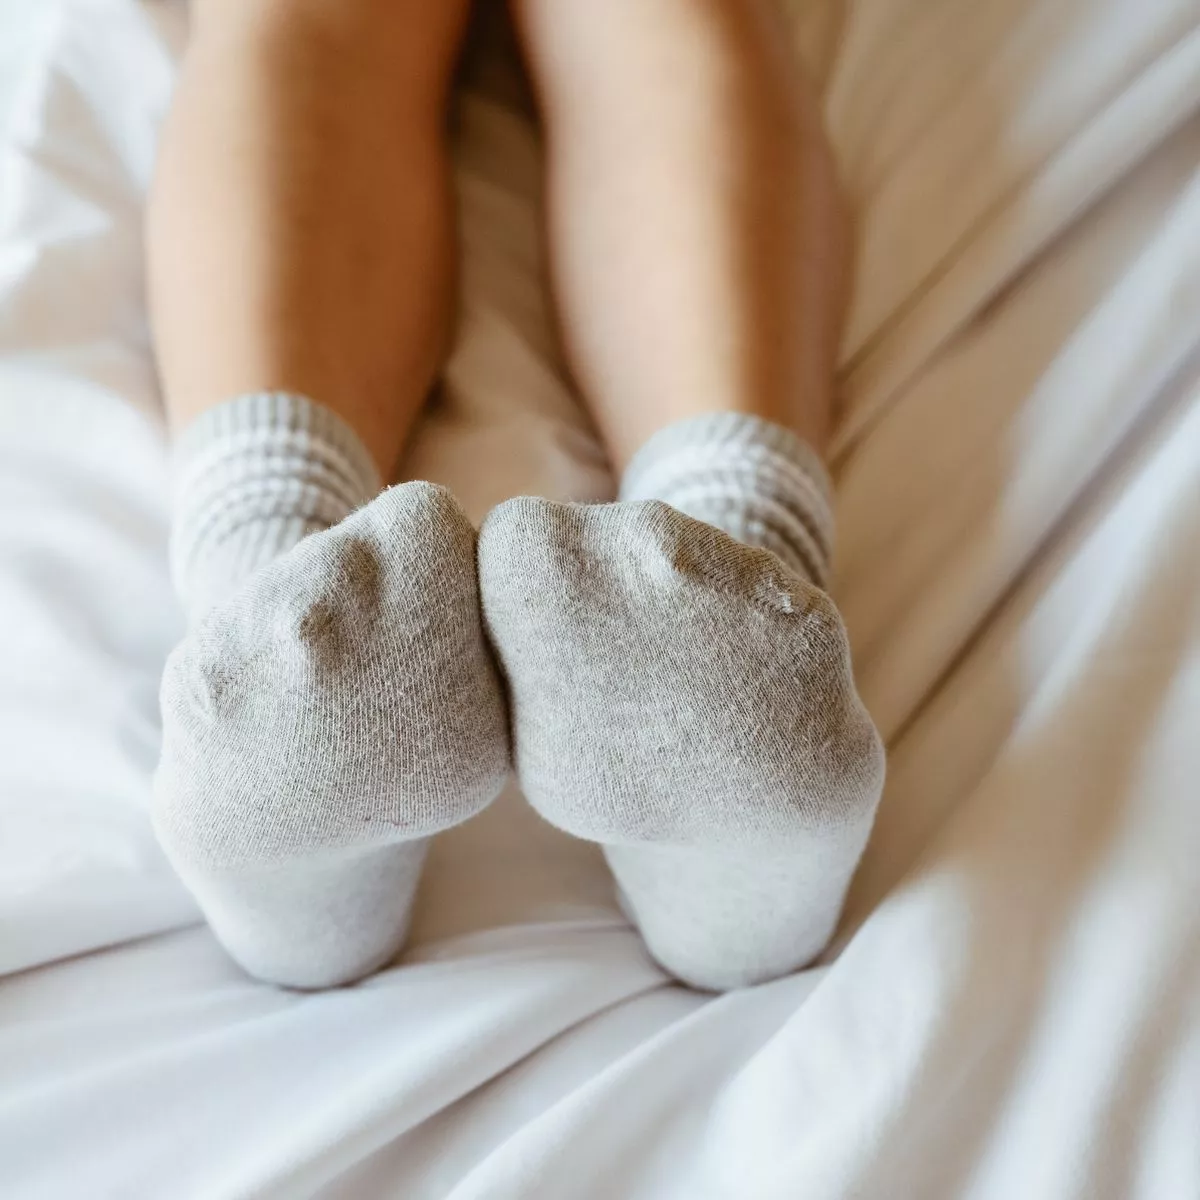 0 Cropped shot of women relaxing in bed with cozy socks